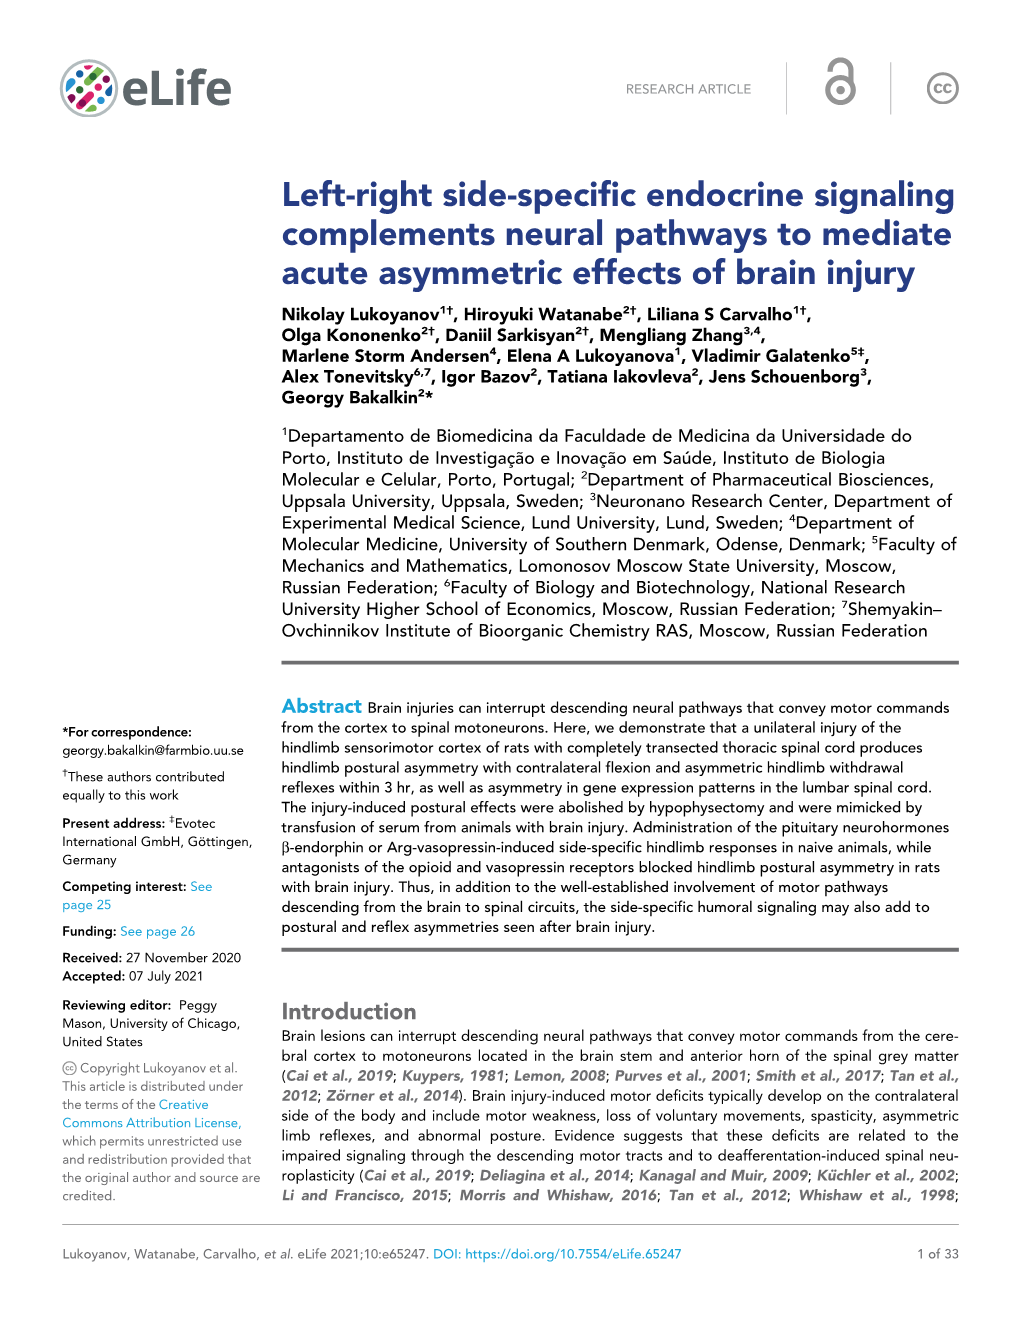 Left-Right Side-Specific Endocrine Signaling Complements Neural